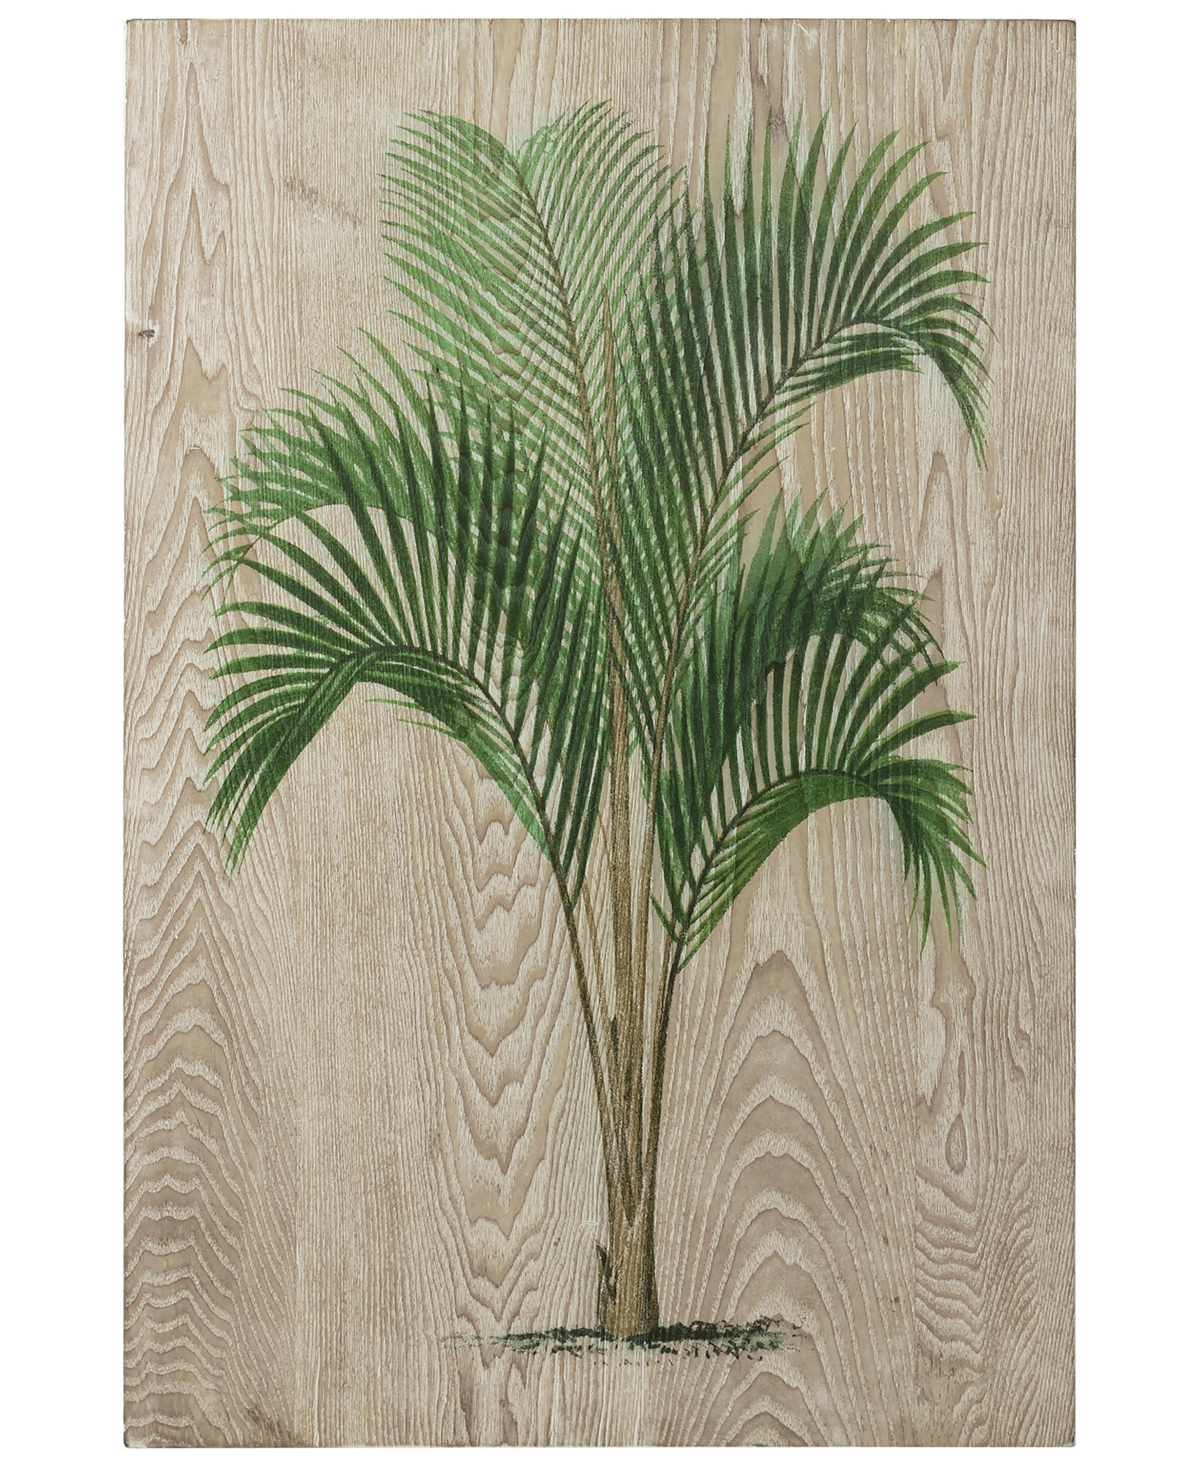 Empire Art Direct "coastal Palm I" Fine Giclee Printed Directly On Hand Finished Ash Wood Wall Art, 36" X 24" X 1.5" In Green